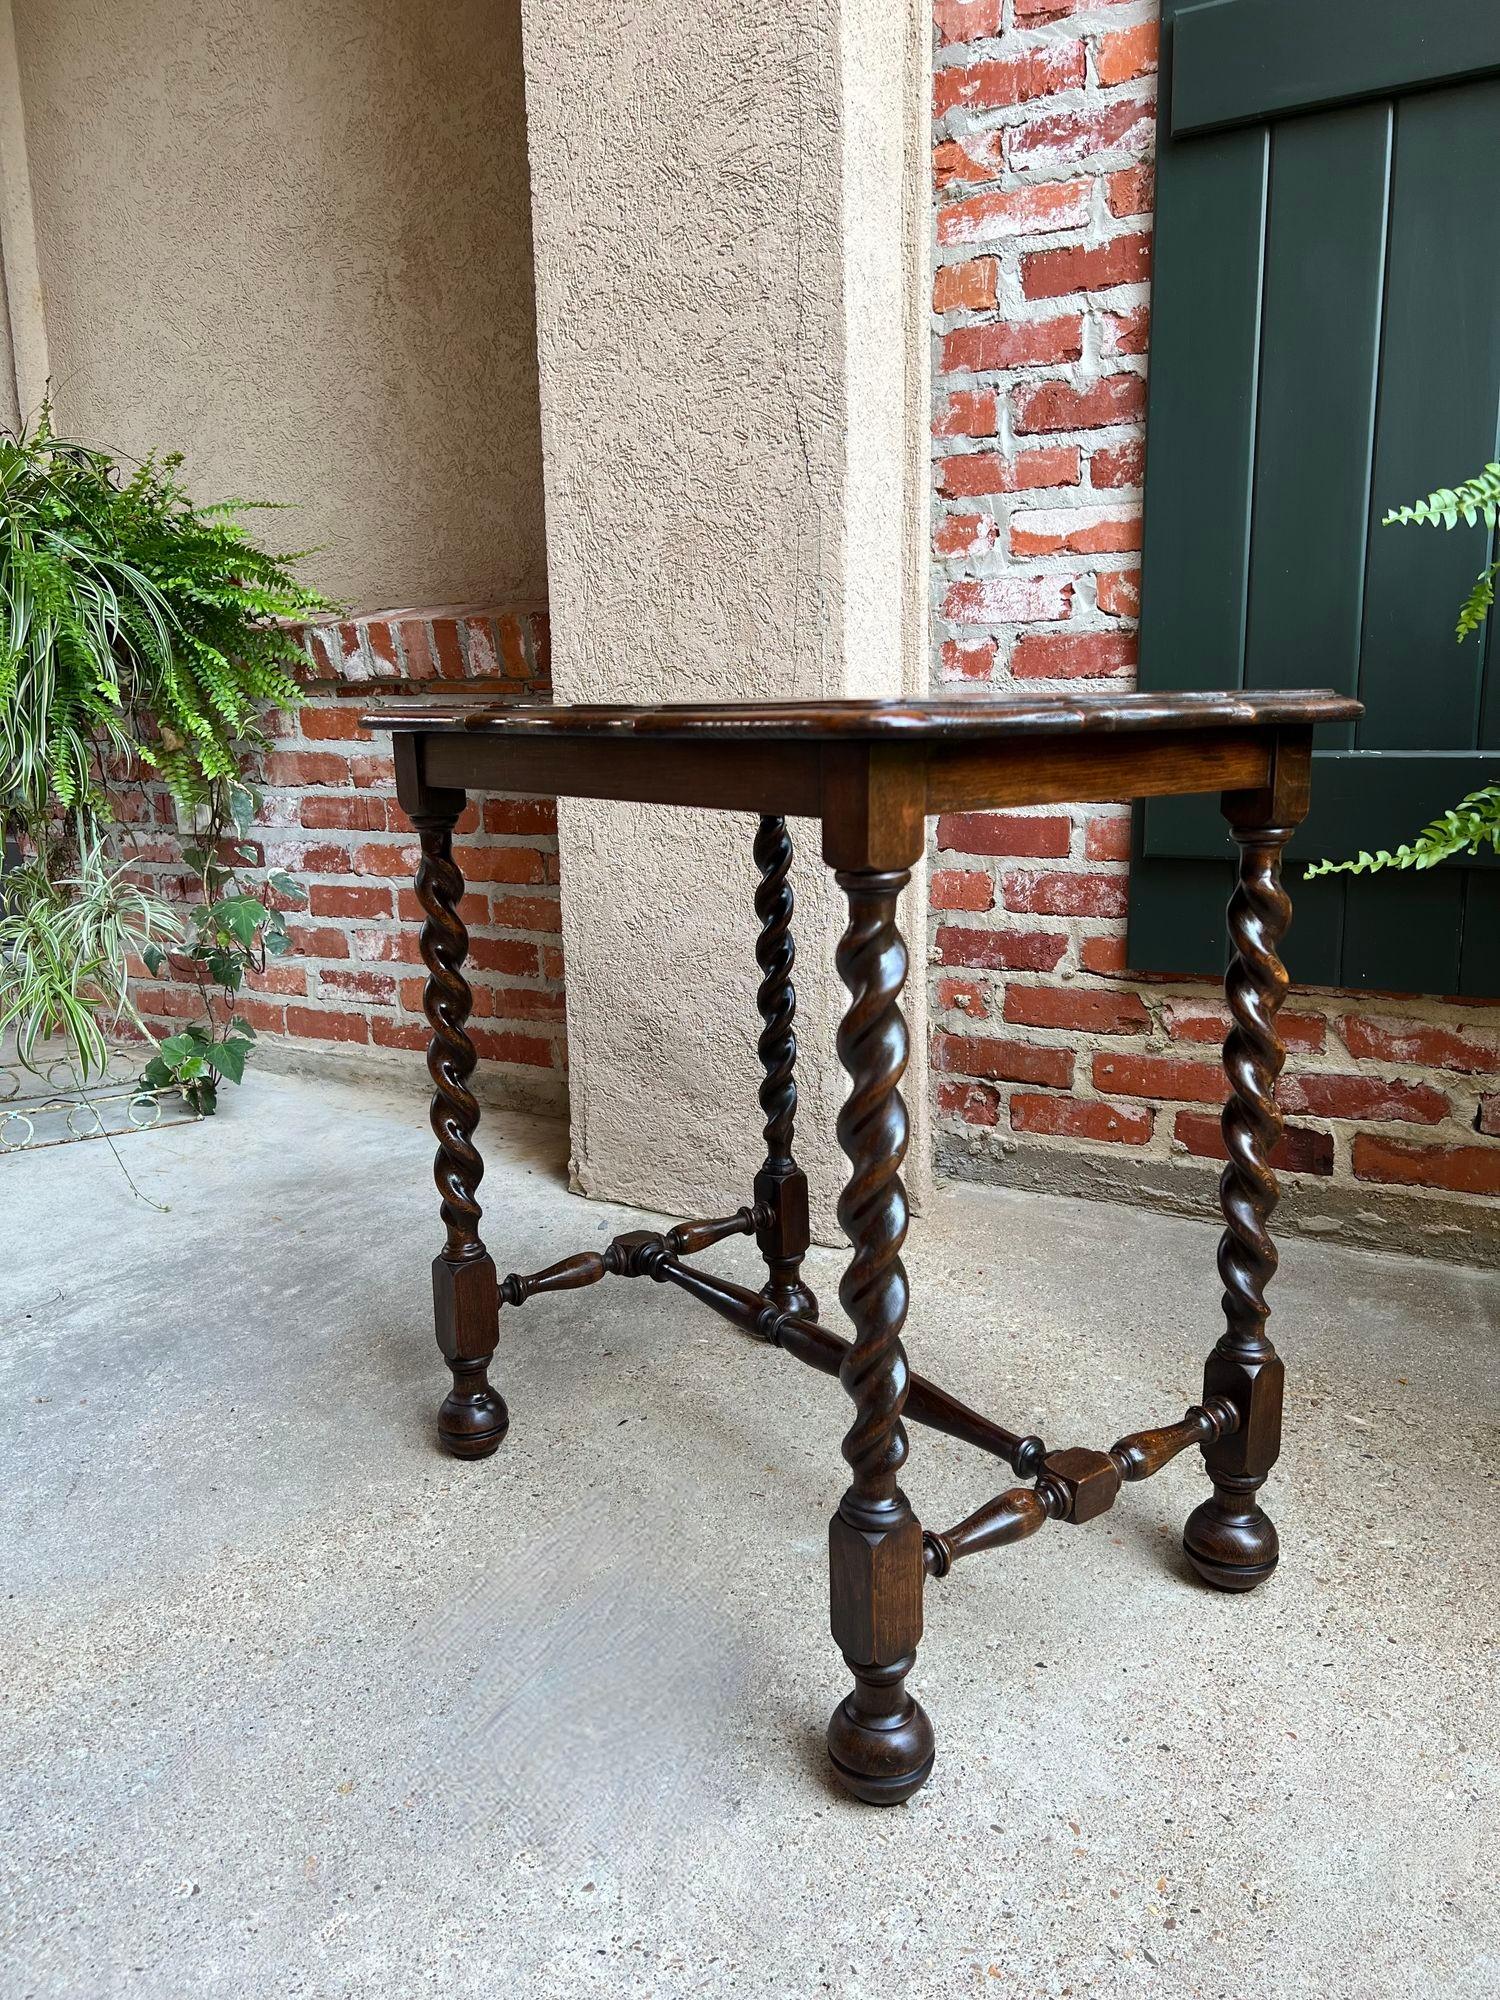 Antique French Oak Side Table Barley Twist Sofa Foyer Dark Oak c1900.

Direct from France, with classic French style, a lovely antique French oak side or sofa table! Beautiful oak grain to the top, with a very large, fancy scalloped beveled edge.